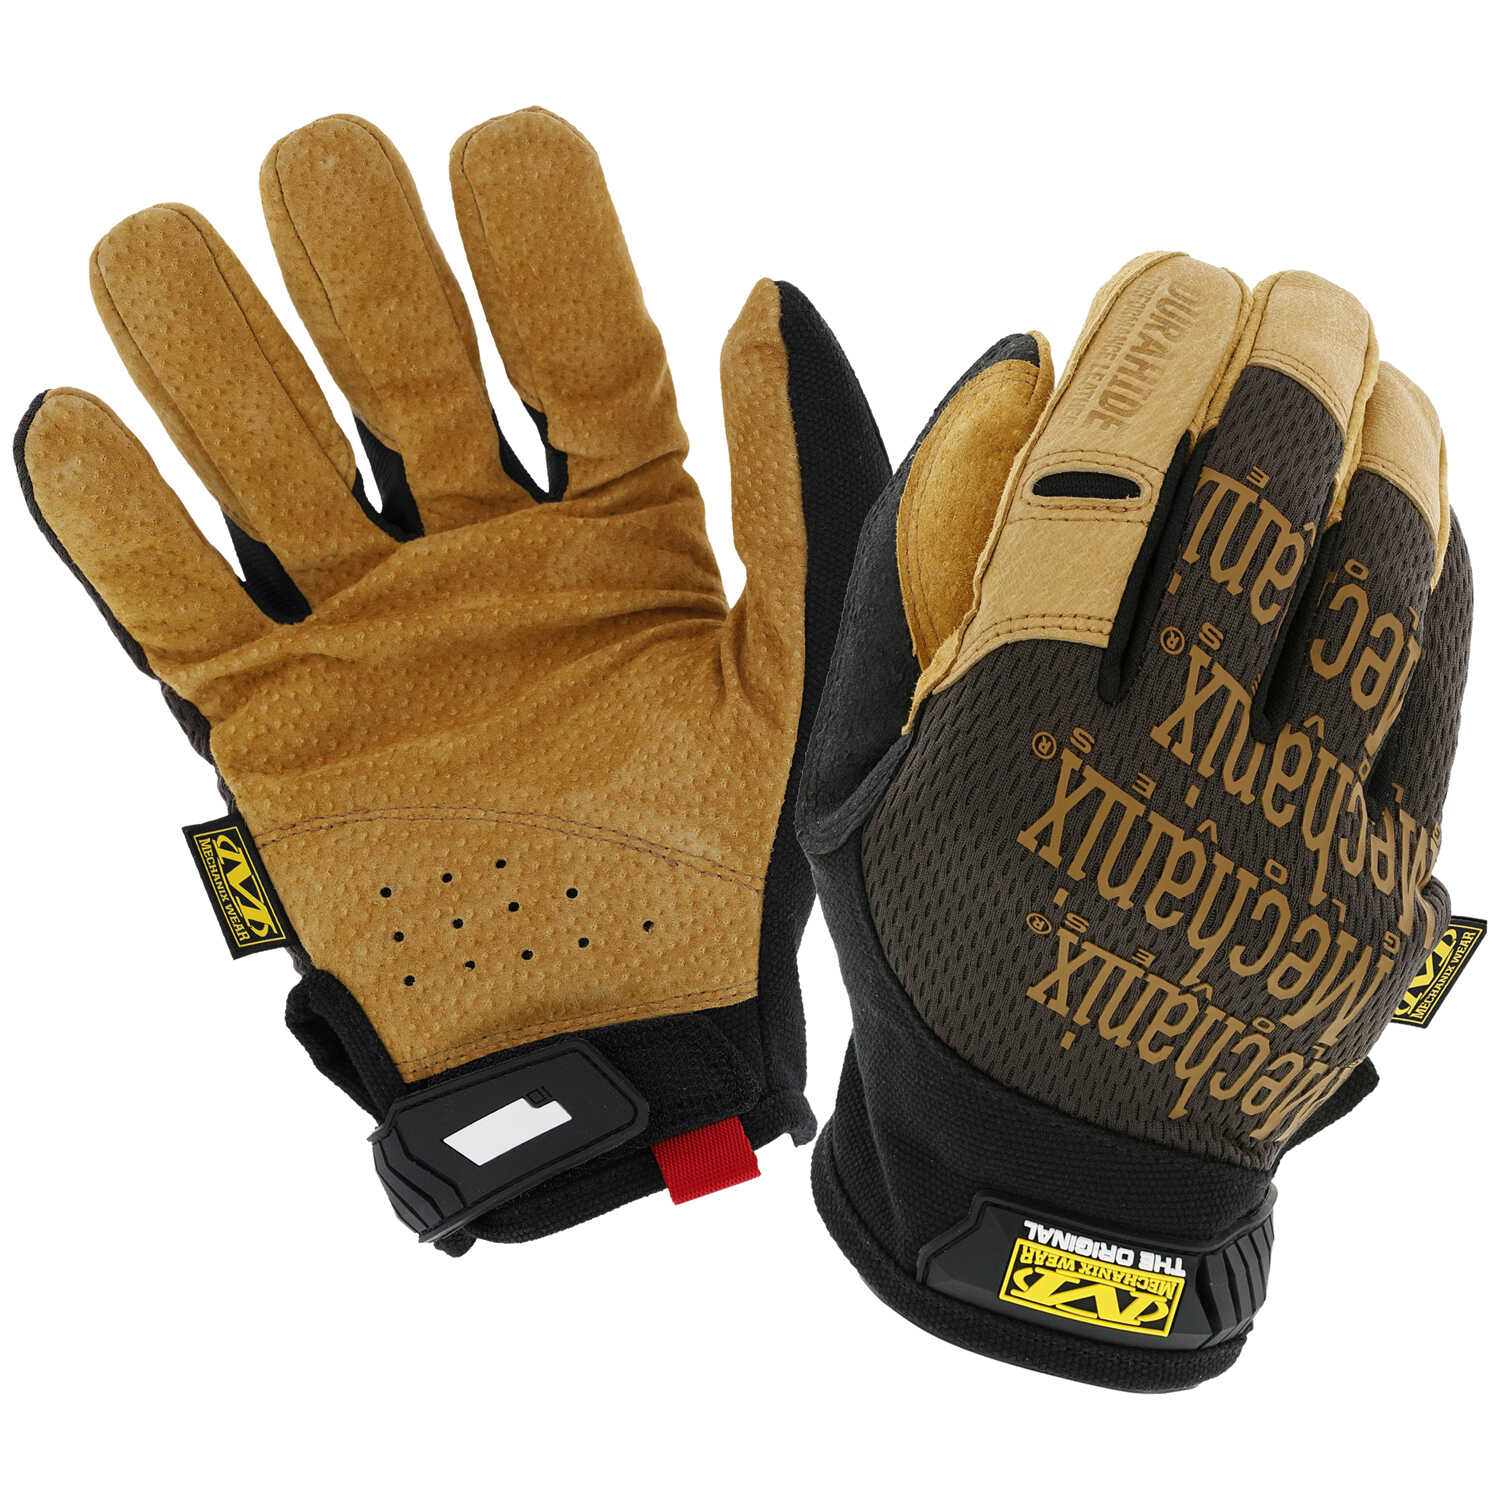 Mechanix Wear: The Original Durahide Leather Work Gloves with Secure Fit,  Utility Gloves for Multi-purpose Use, Abrasion Resistant, Added Durability